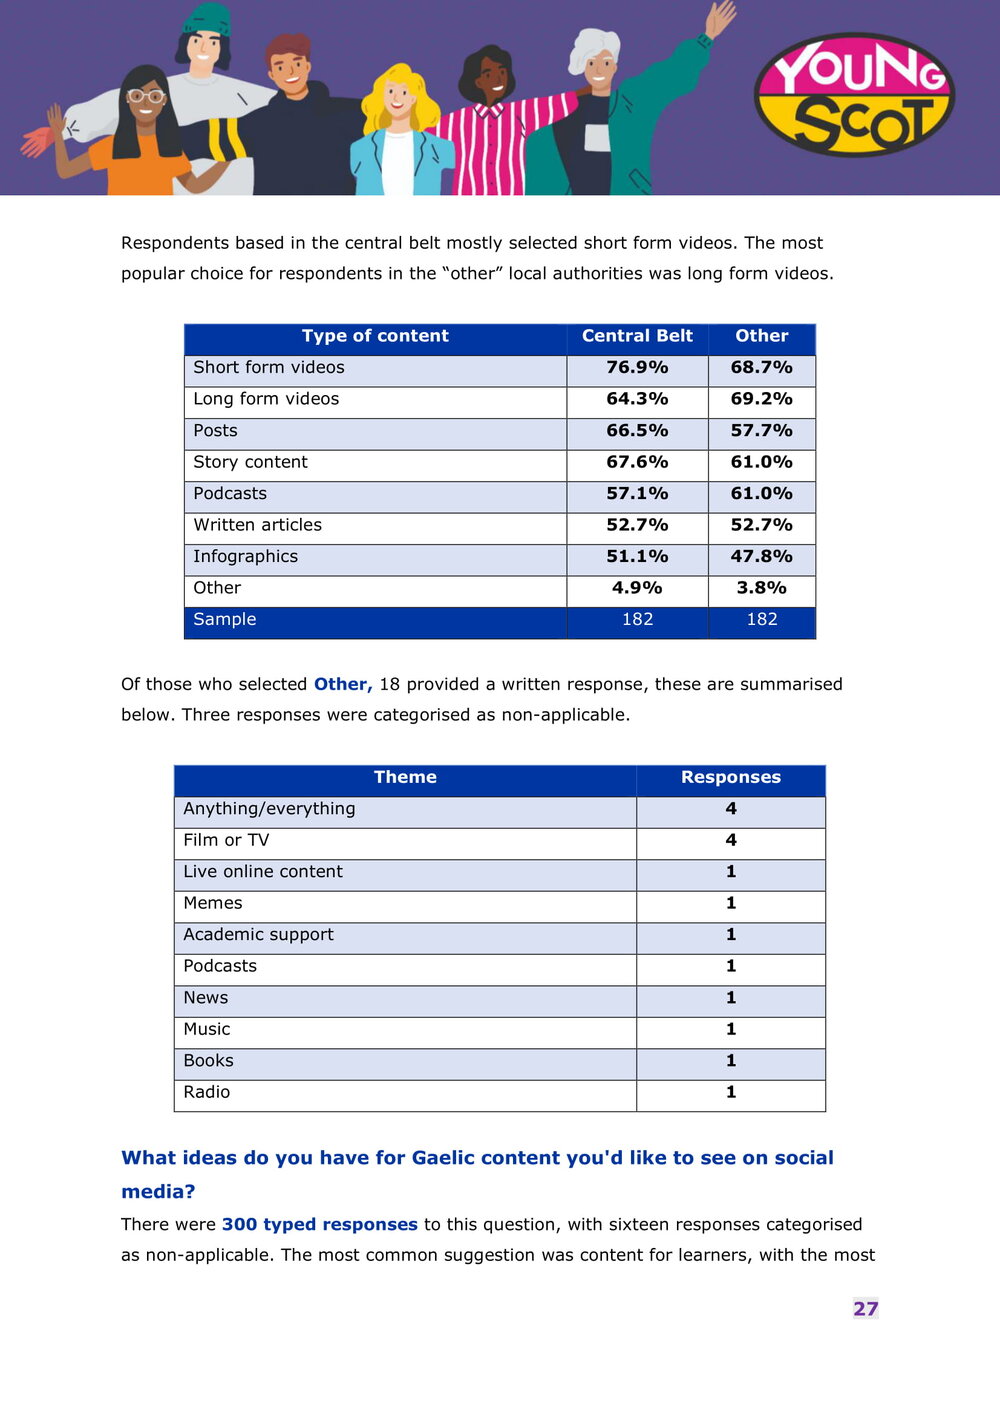 Engaging with Gaelic Online - Survey Results Report-28.jpg